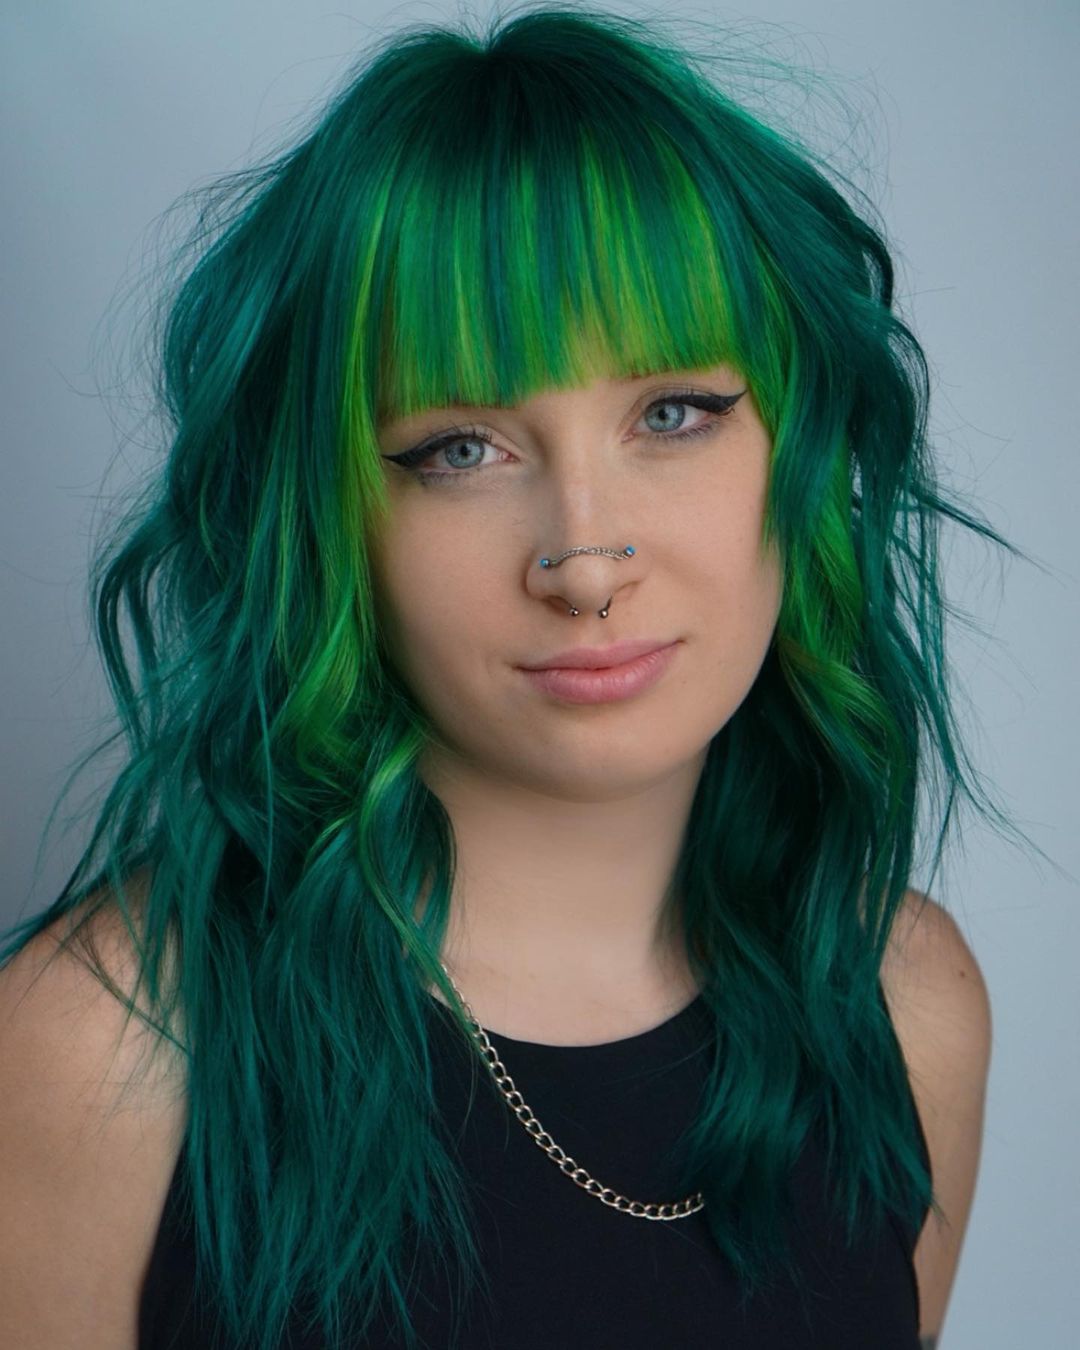 22 Green Hair Ideas That Will Inspire You to Switch Up Your Look